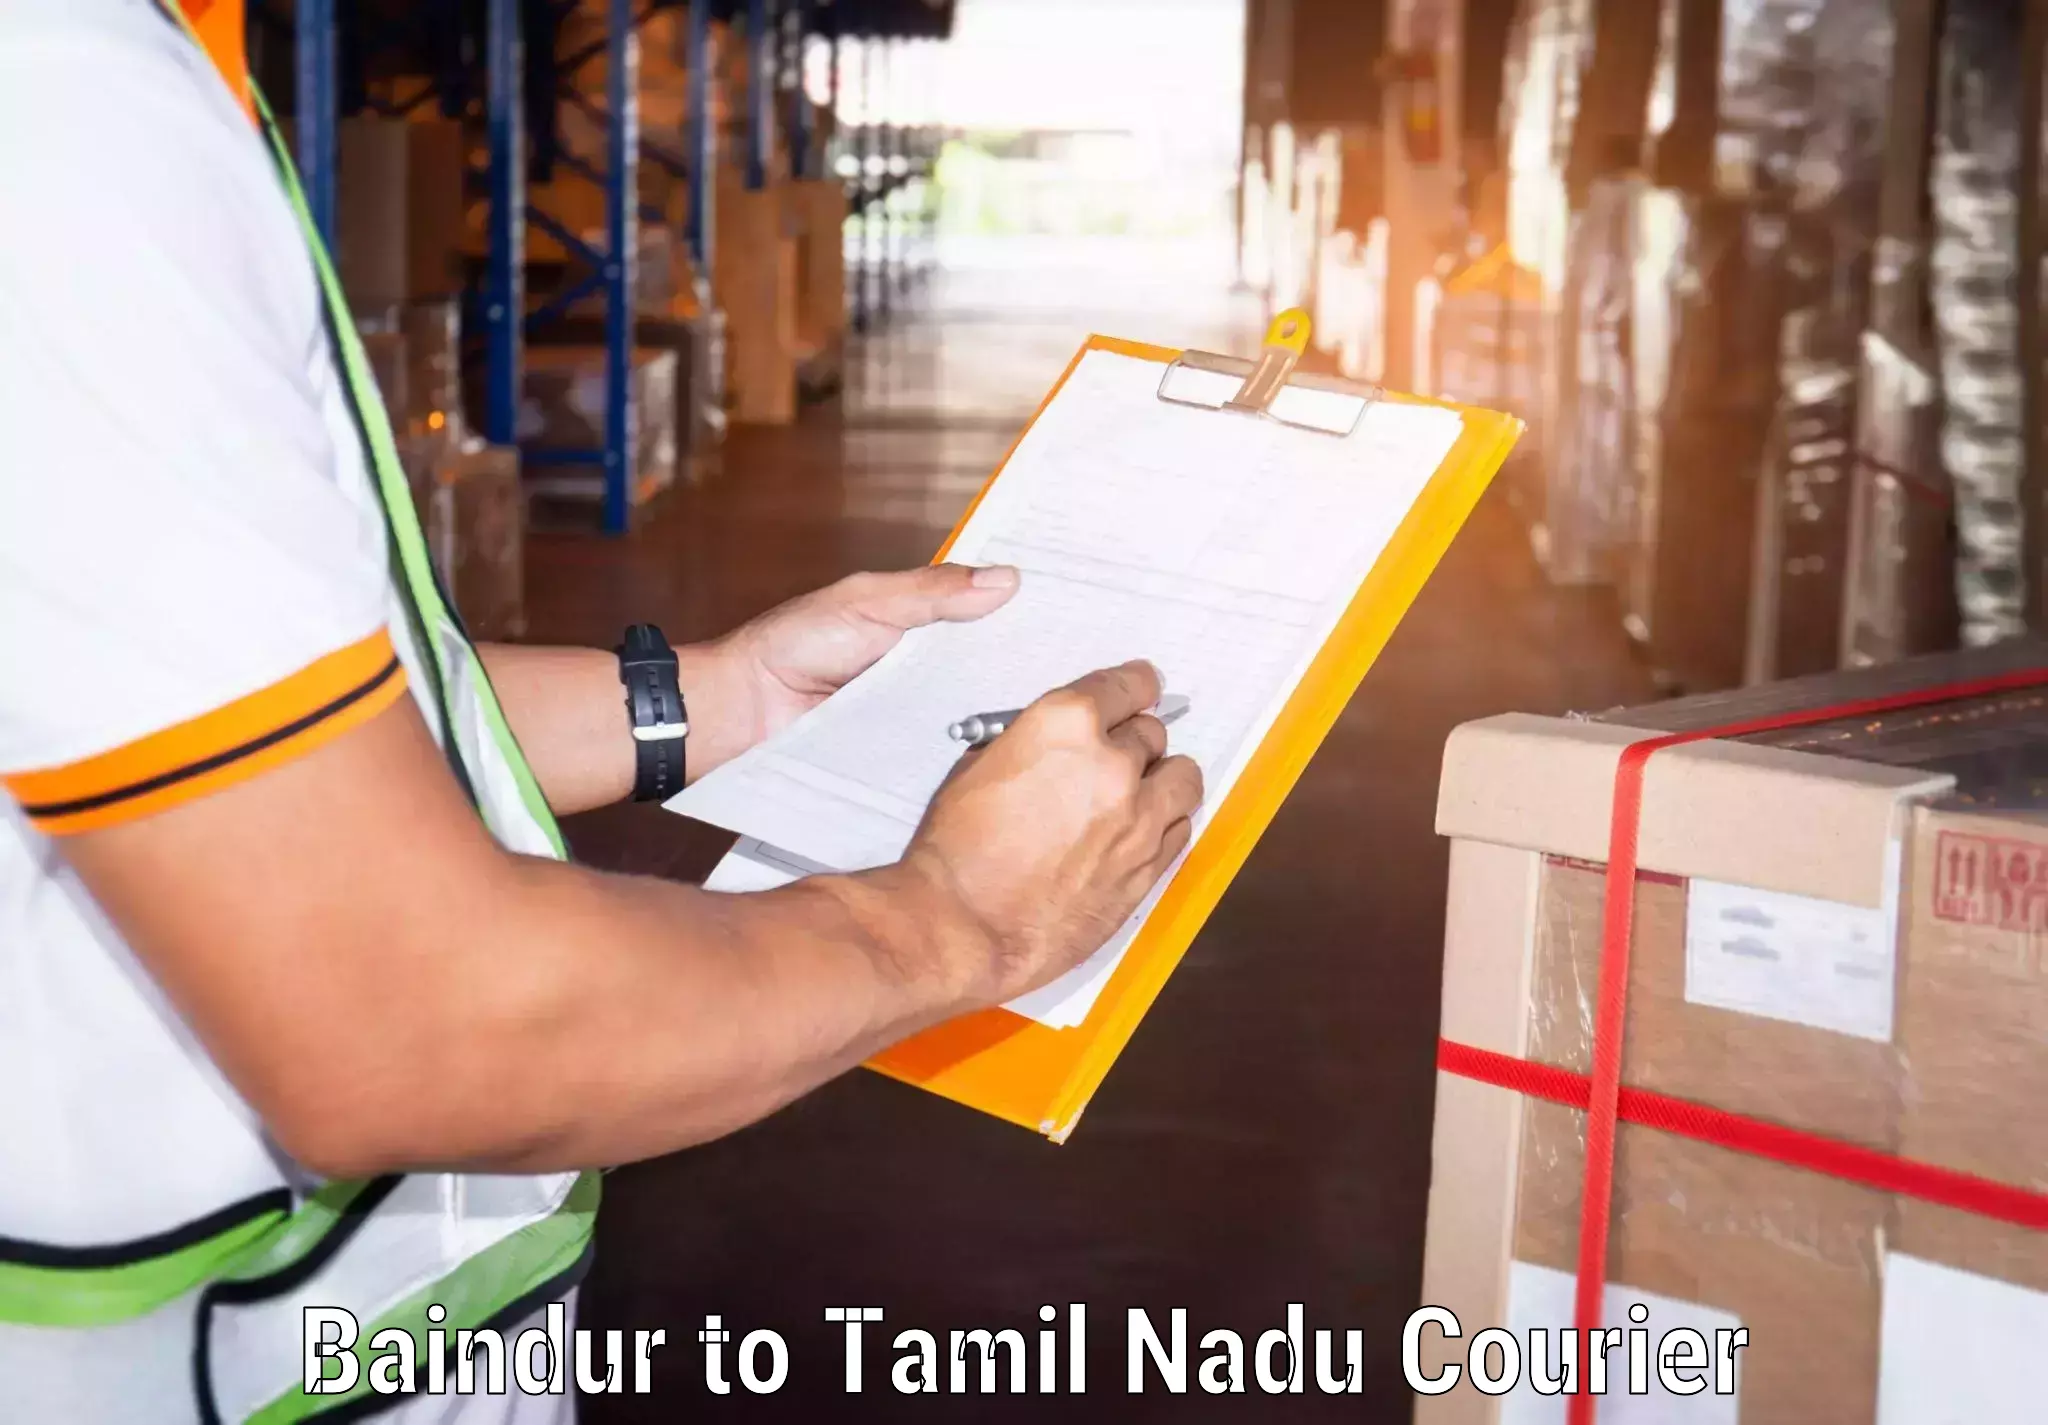 Customizable shipping options Baindur to Saveetha Institute of Medical and Technical Sciences Chennai